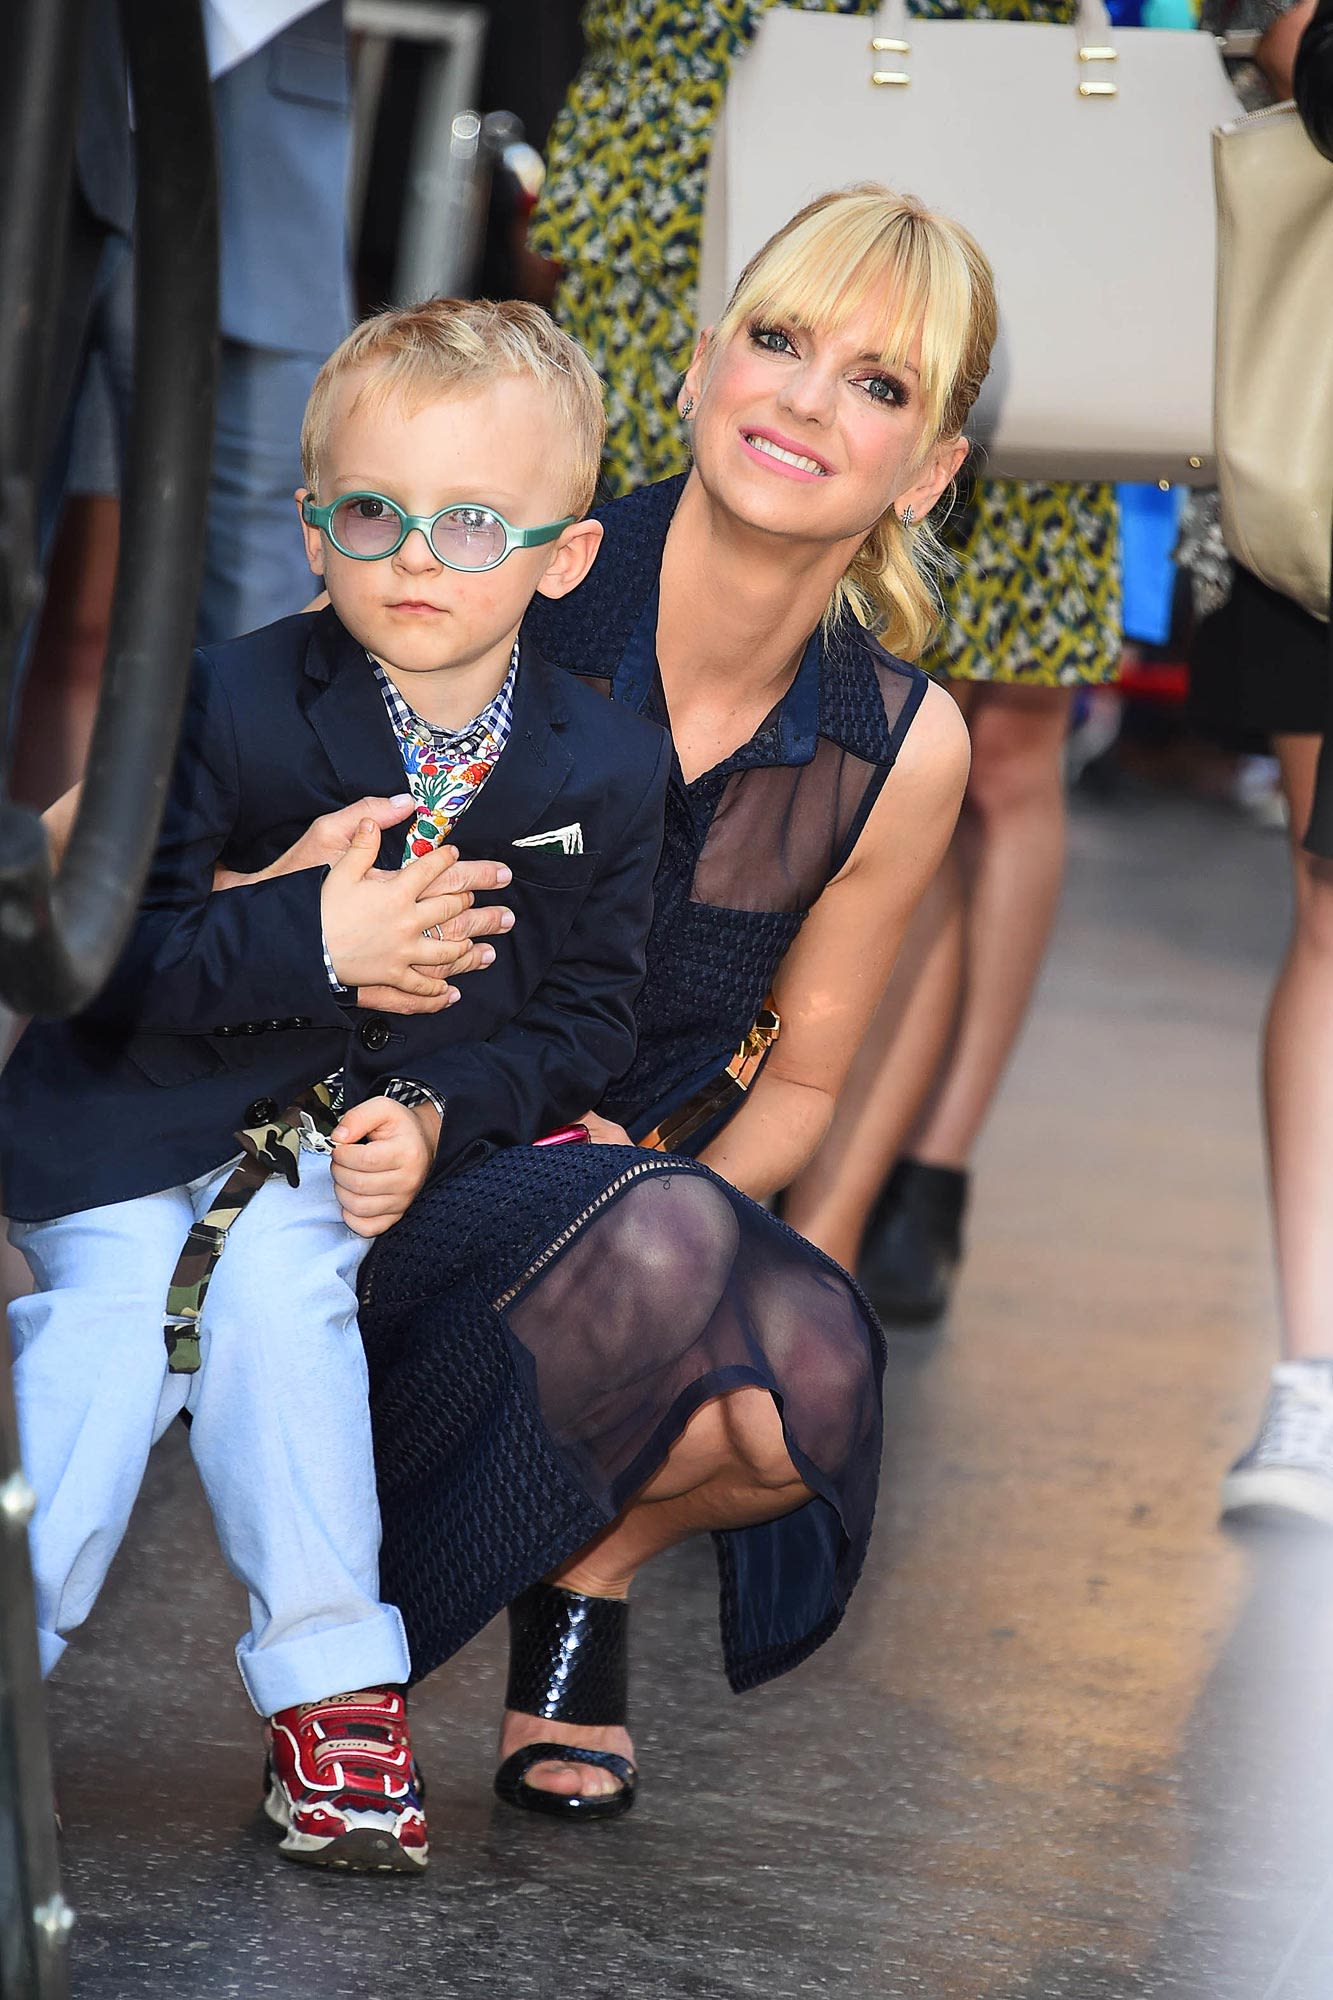 Anna Faris Is ‘Loving’ Raising 11-Year-Old Son Jack — But She Has Some Preteen Pet Peeves